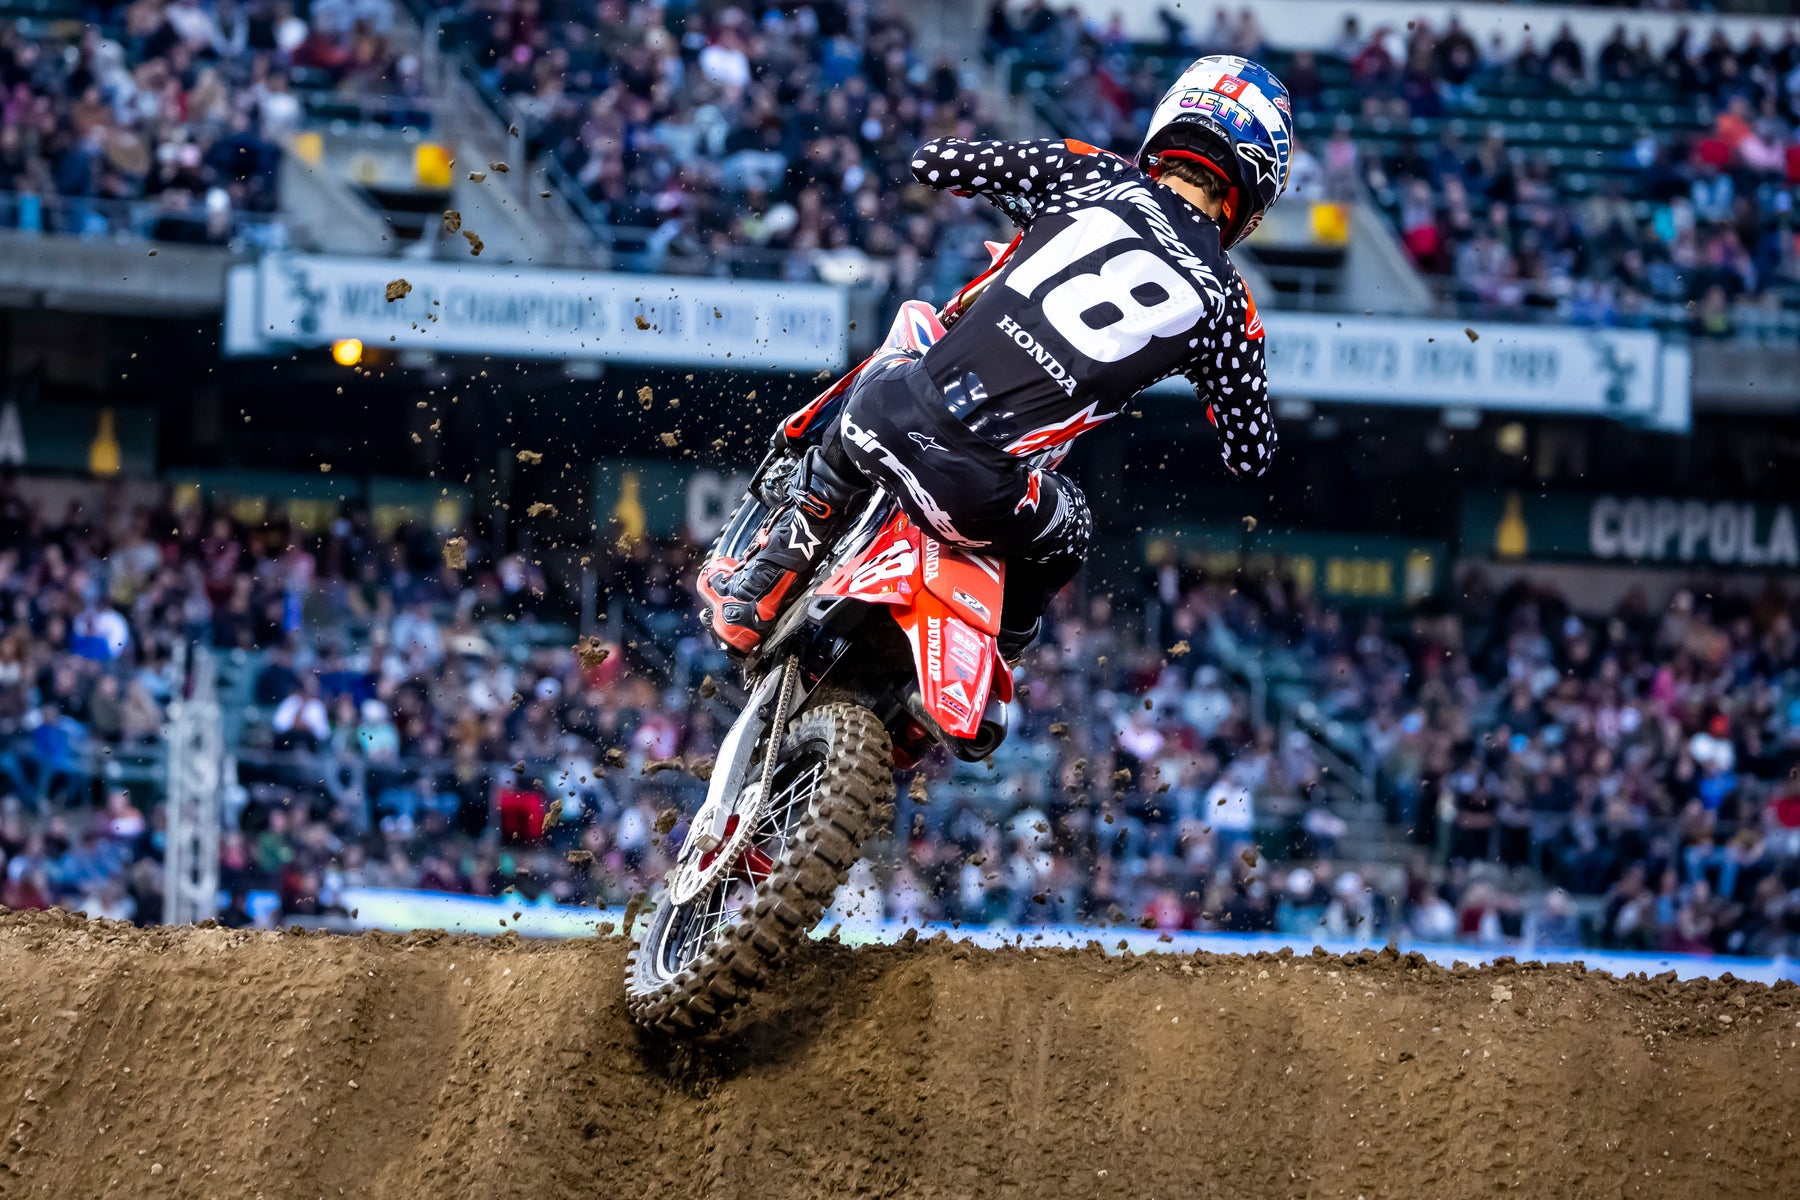 HIGH-FLYING JETT LAWRENCE IN A CLASS OF HIS OWN IN 250SX WEST RACE IN OAKLAND